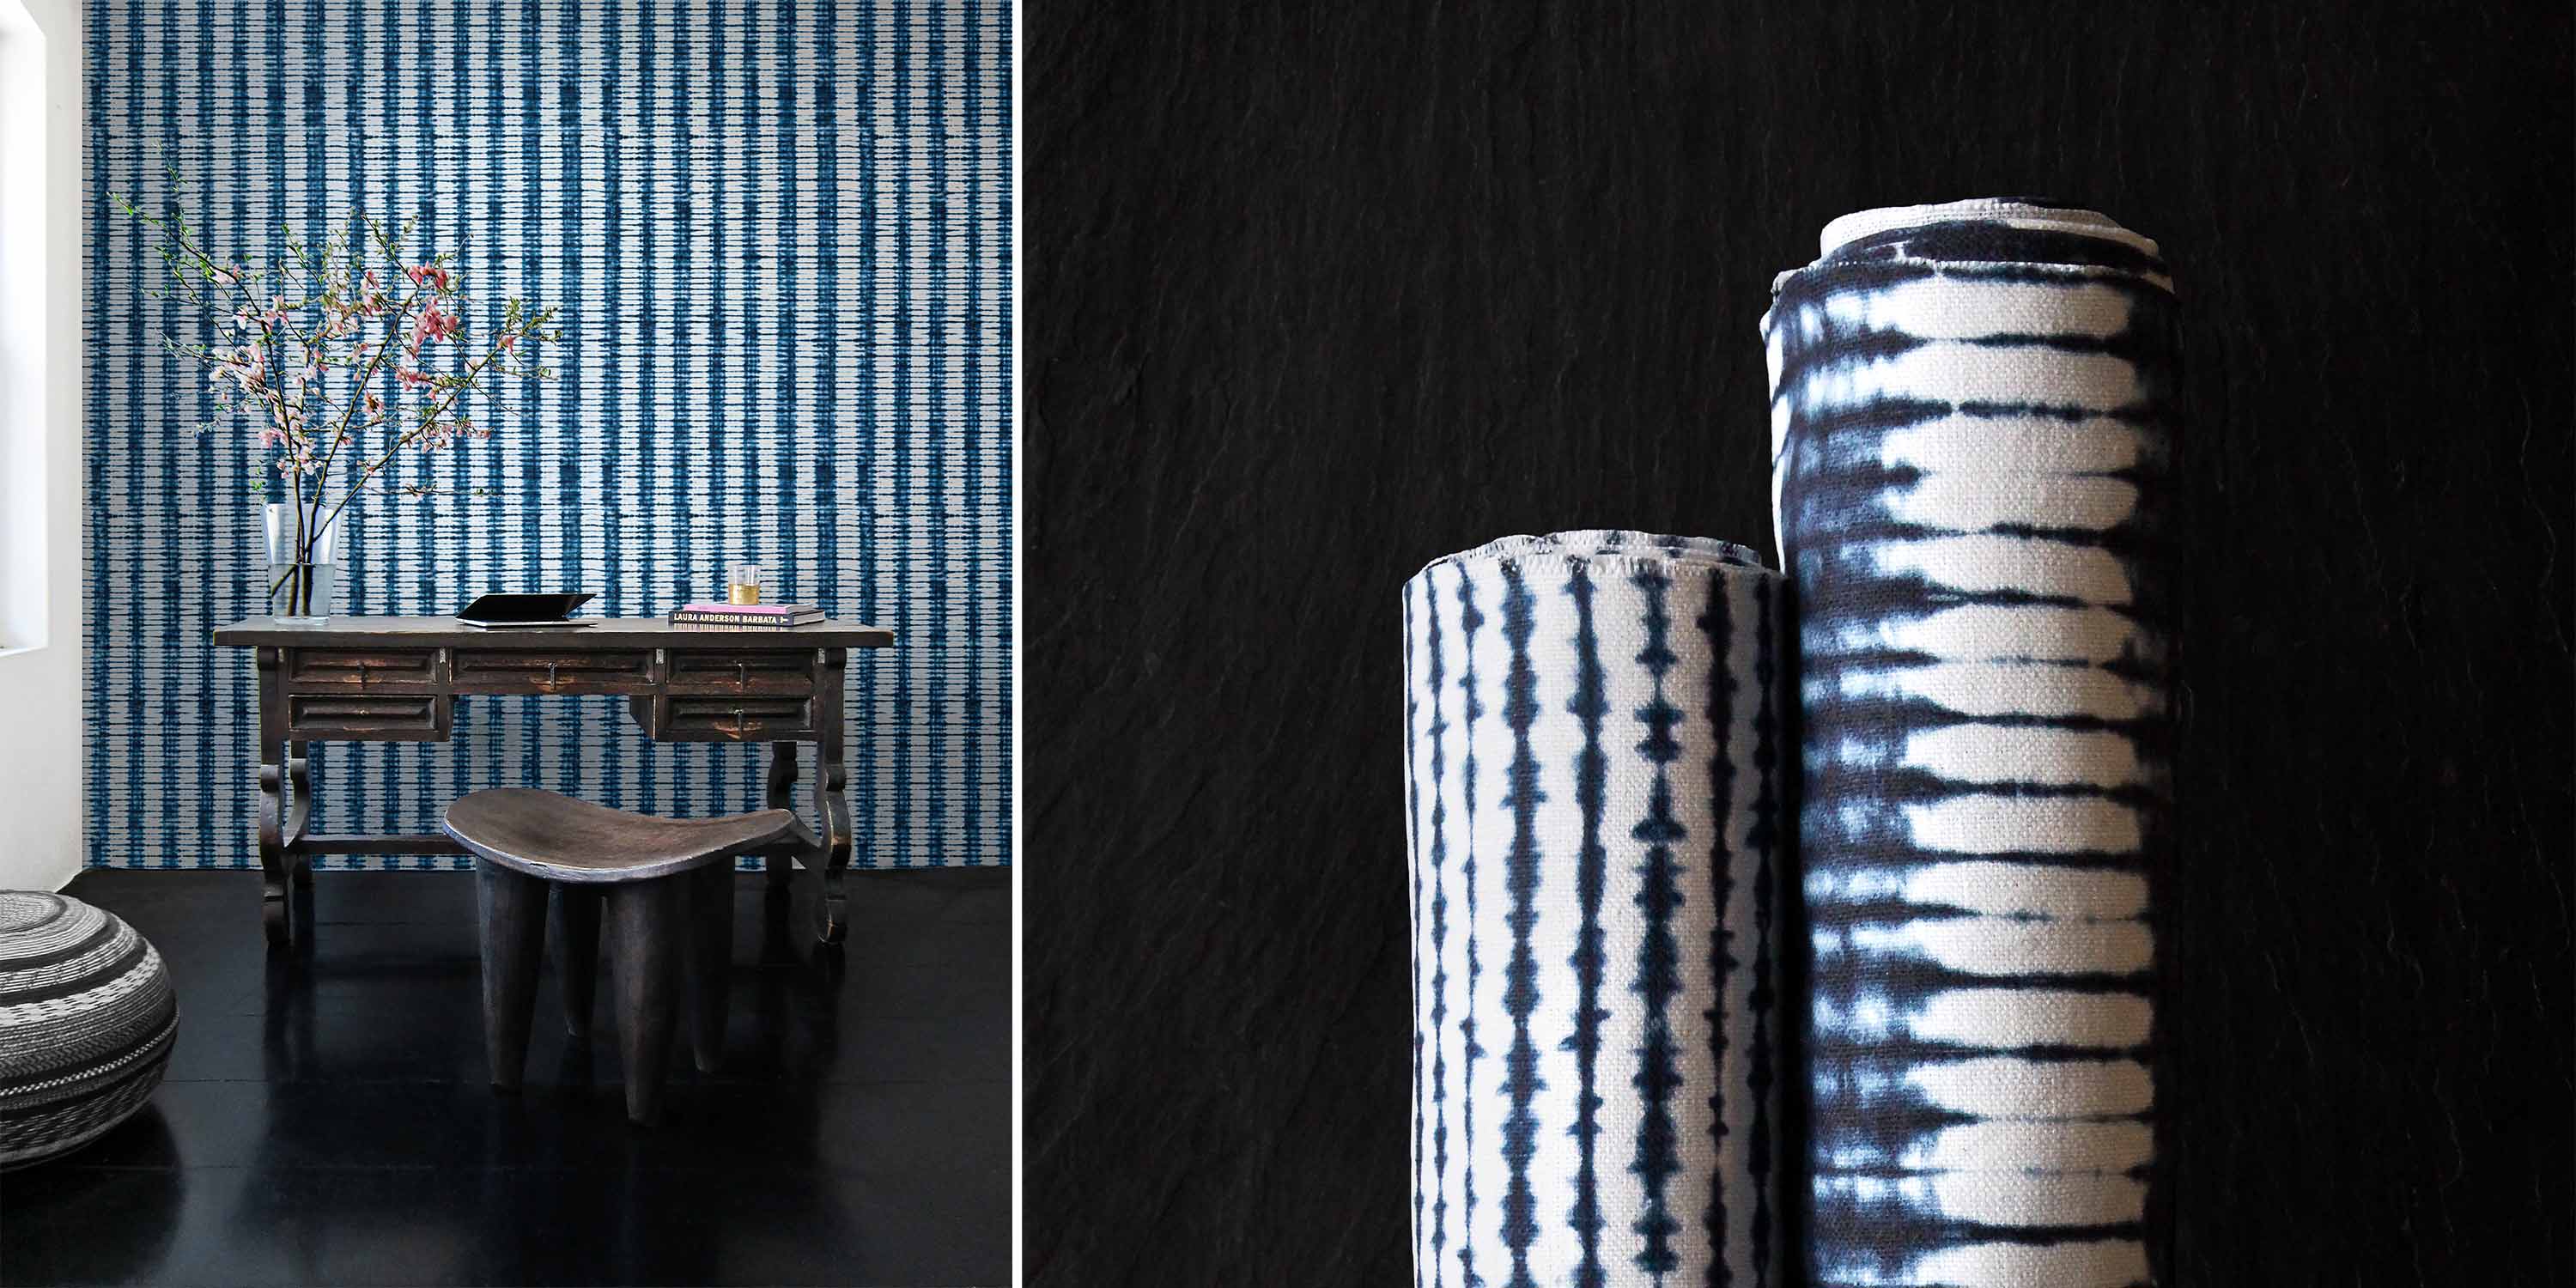 burkina wallpaper, fabric by the yard and linen pillows with patterns inspired by traditional indigo dying.